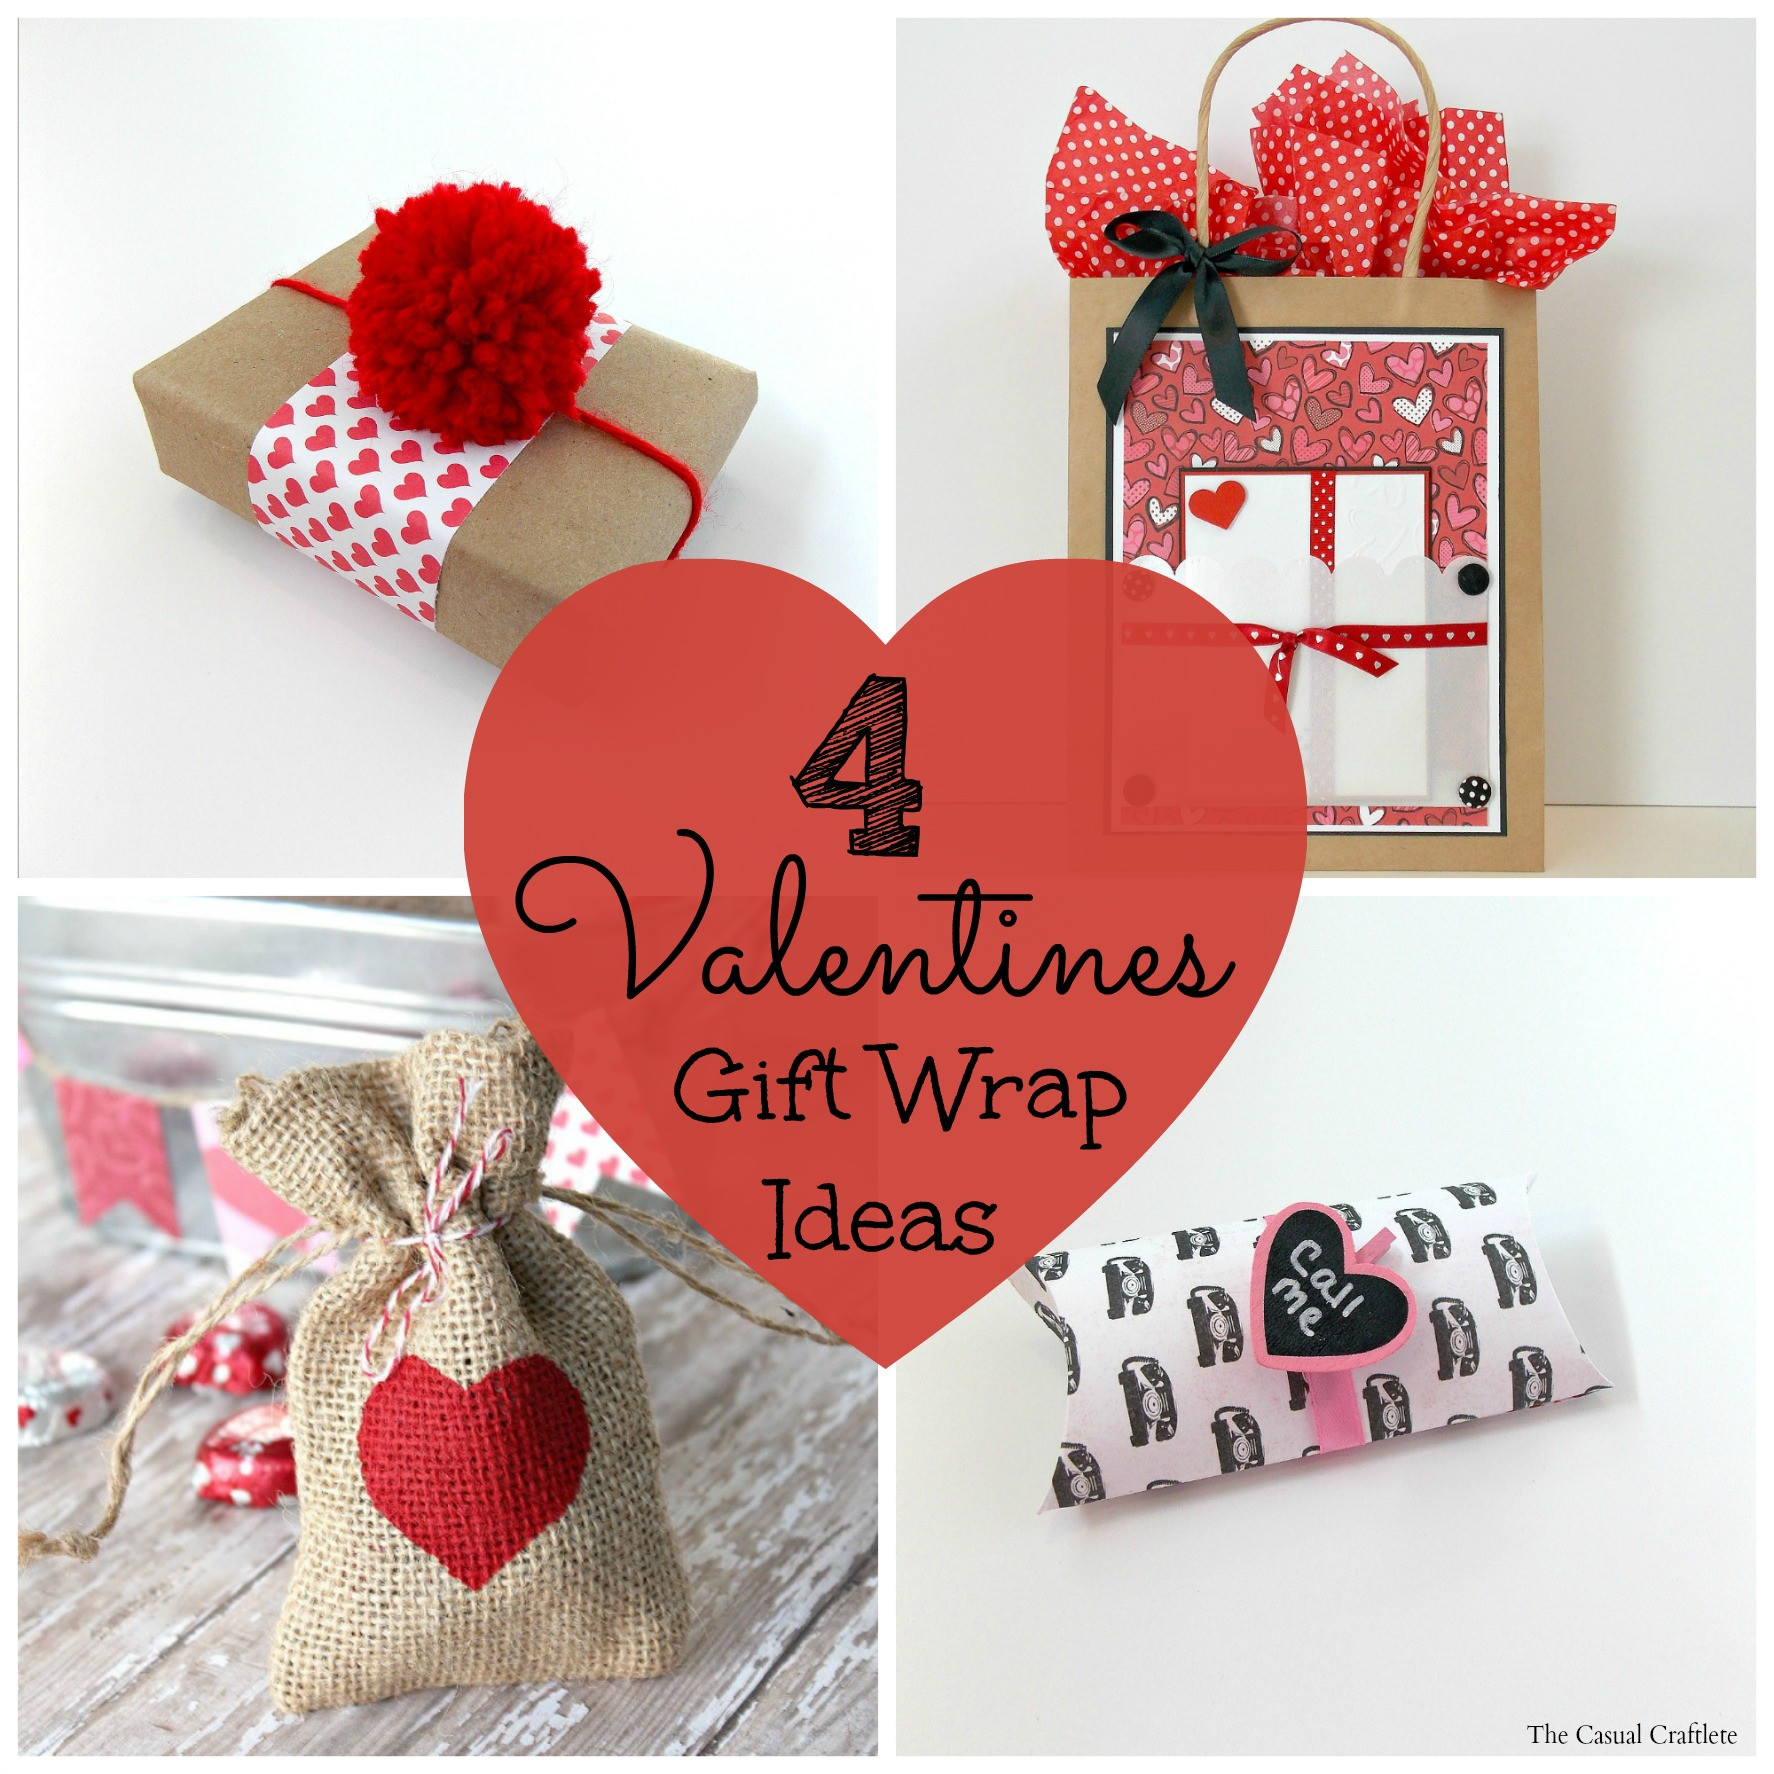 Valentines Day Gift Wrapping Ideas
 4 Valentines Gift Wrap Ideas Purely Katie